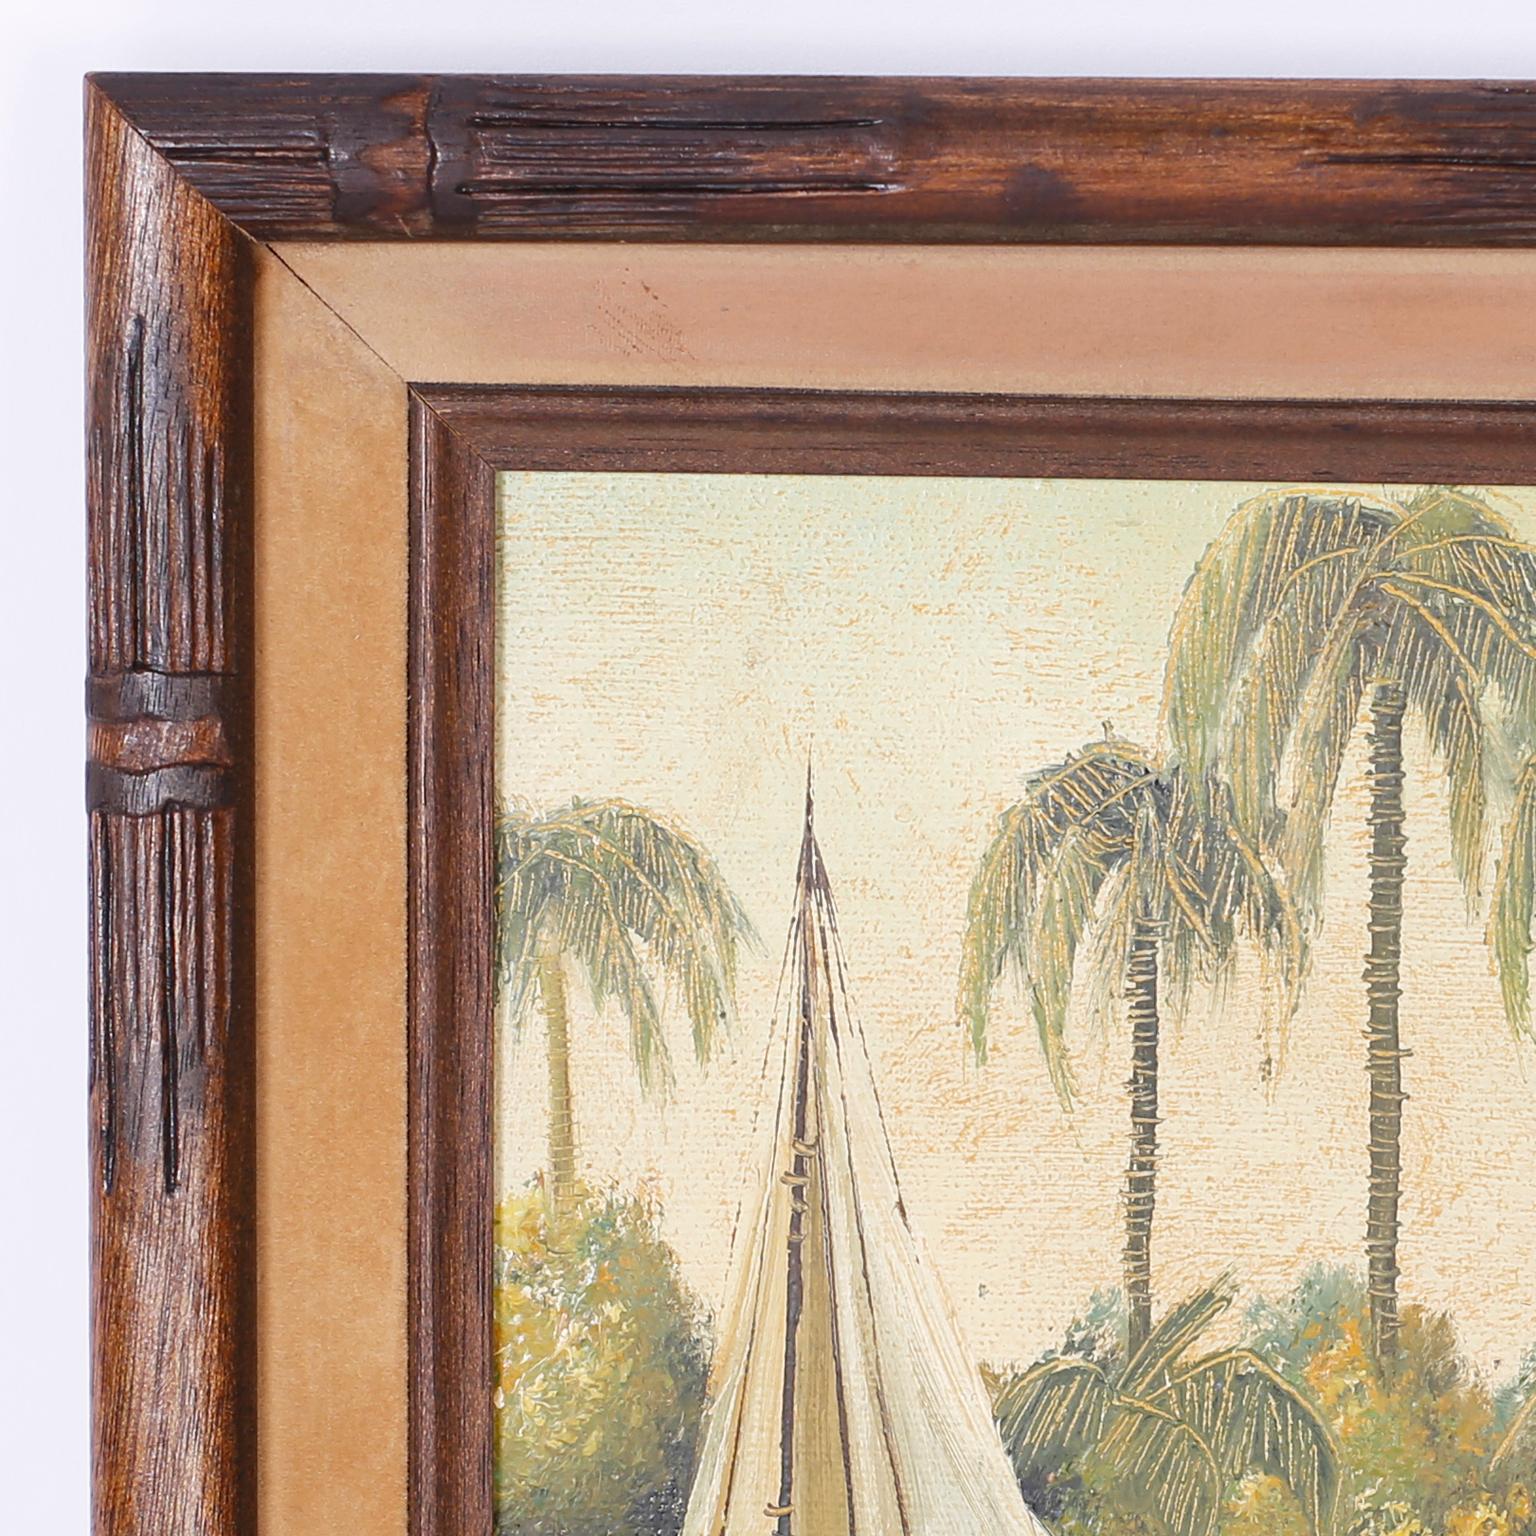 Oil painting on canvas depicting a sailboat with two inhabitants in a tropical waterway complete with palm trees, signed D. Gibbs, and presented in a carved wood faux bamboo frame.